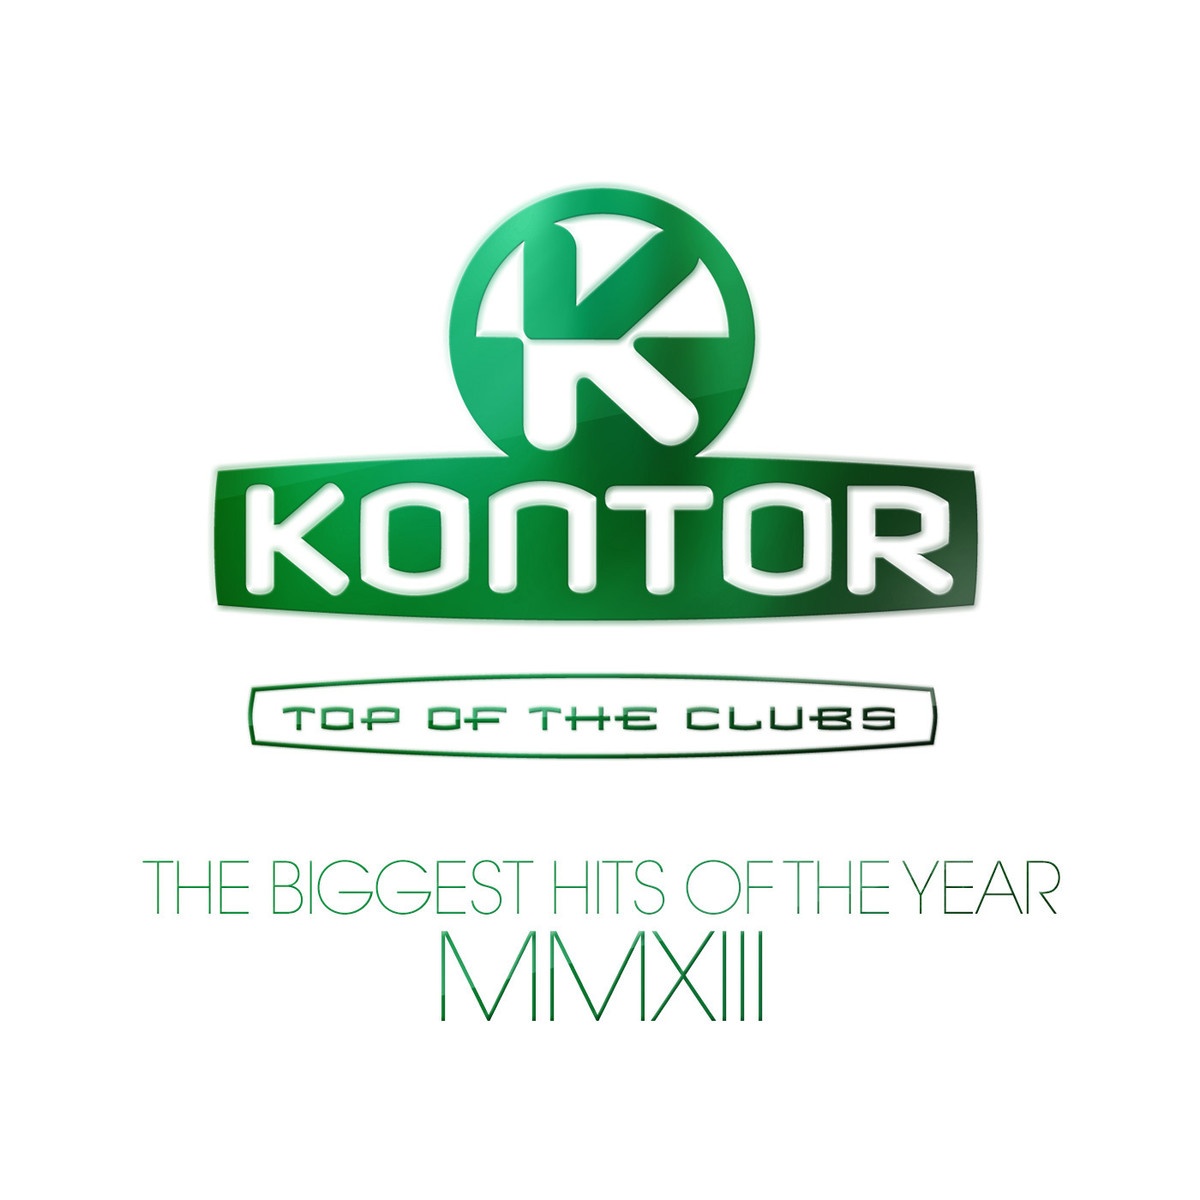 The Biggest Hits Of The Year Mmxiii Mix, Pt. 3